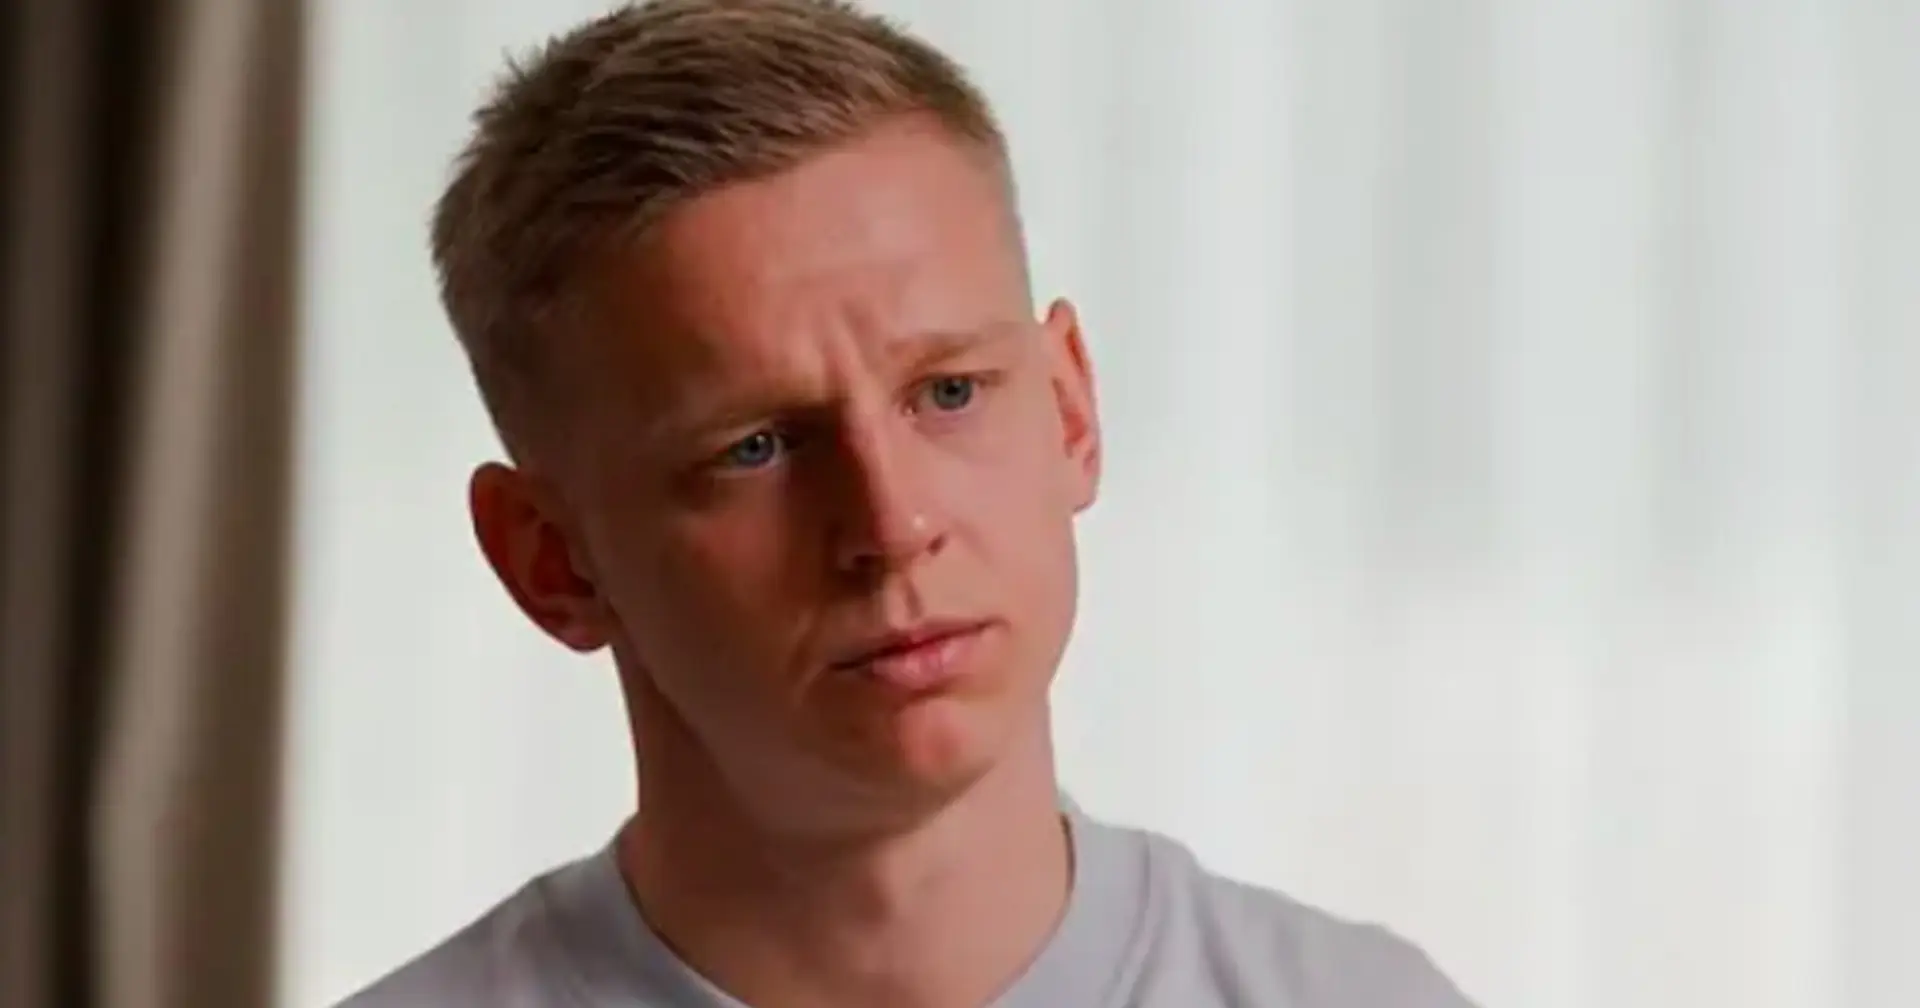 Zinchenko: I would go to war if called up